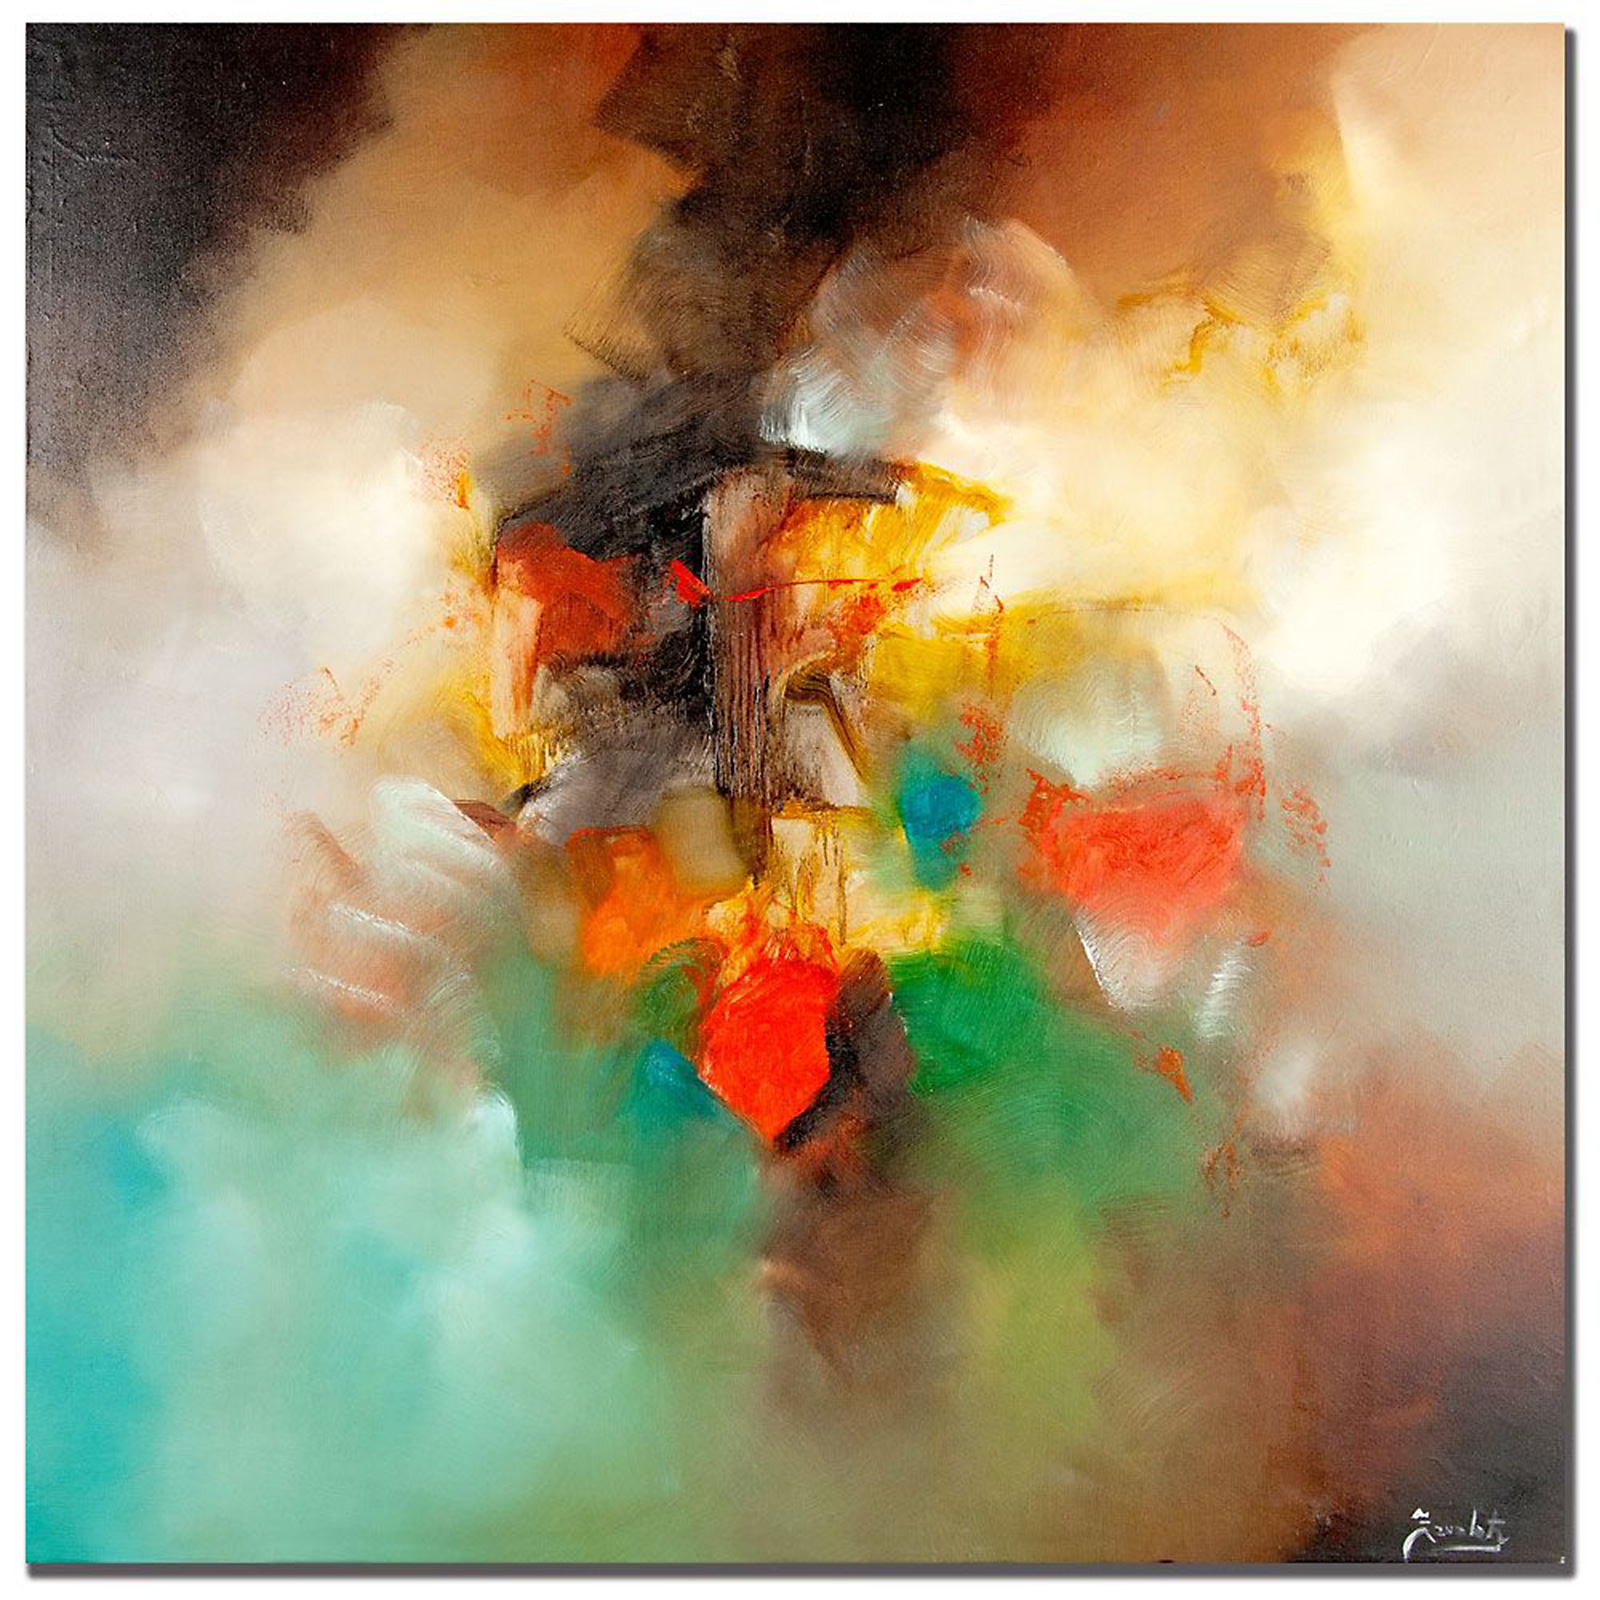 Trademark Global 35x35 inches "Abstract I" by Rio